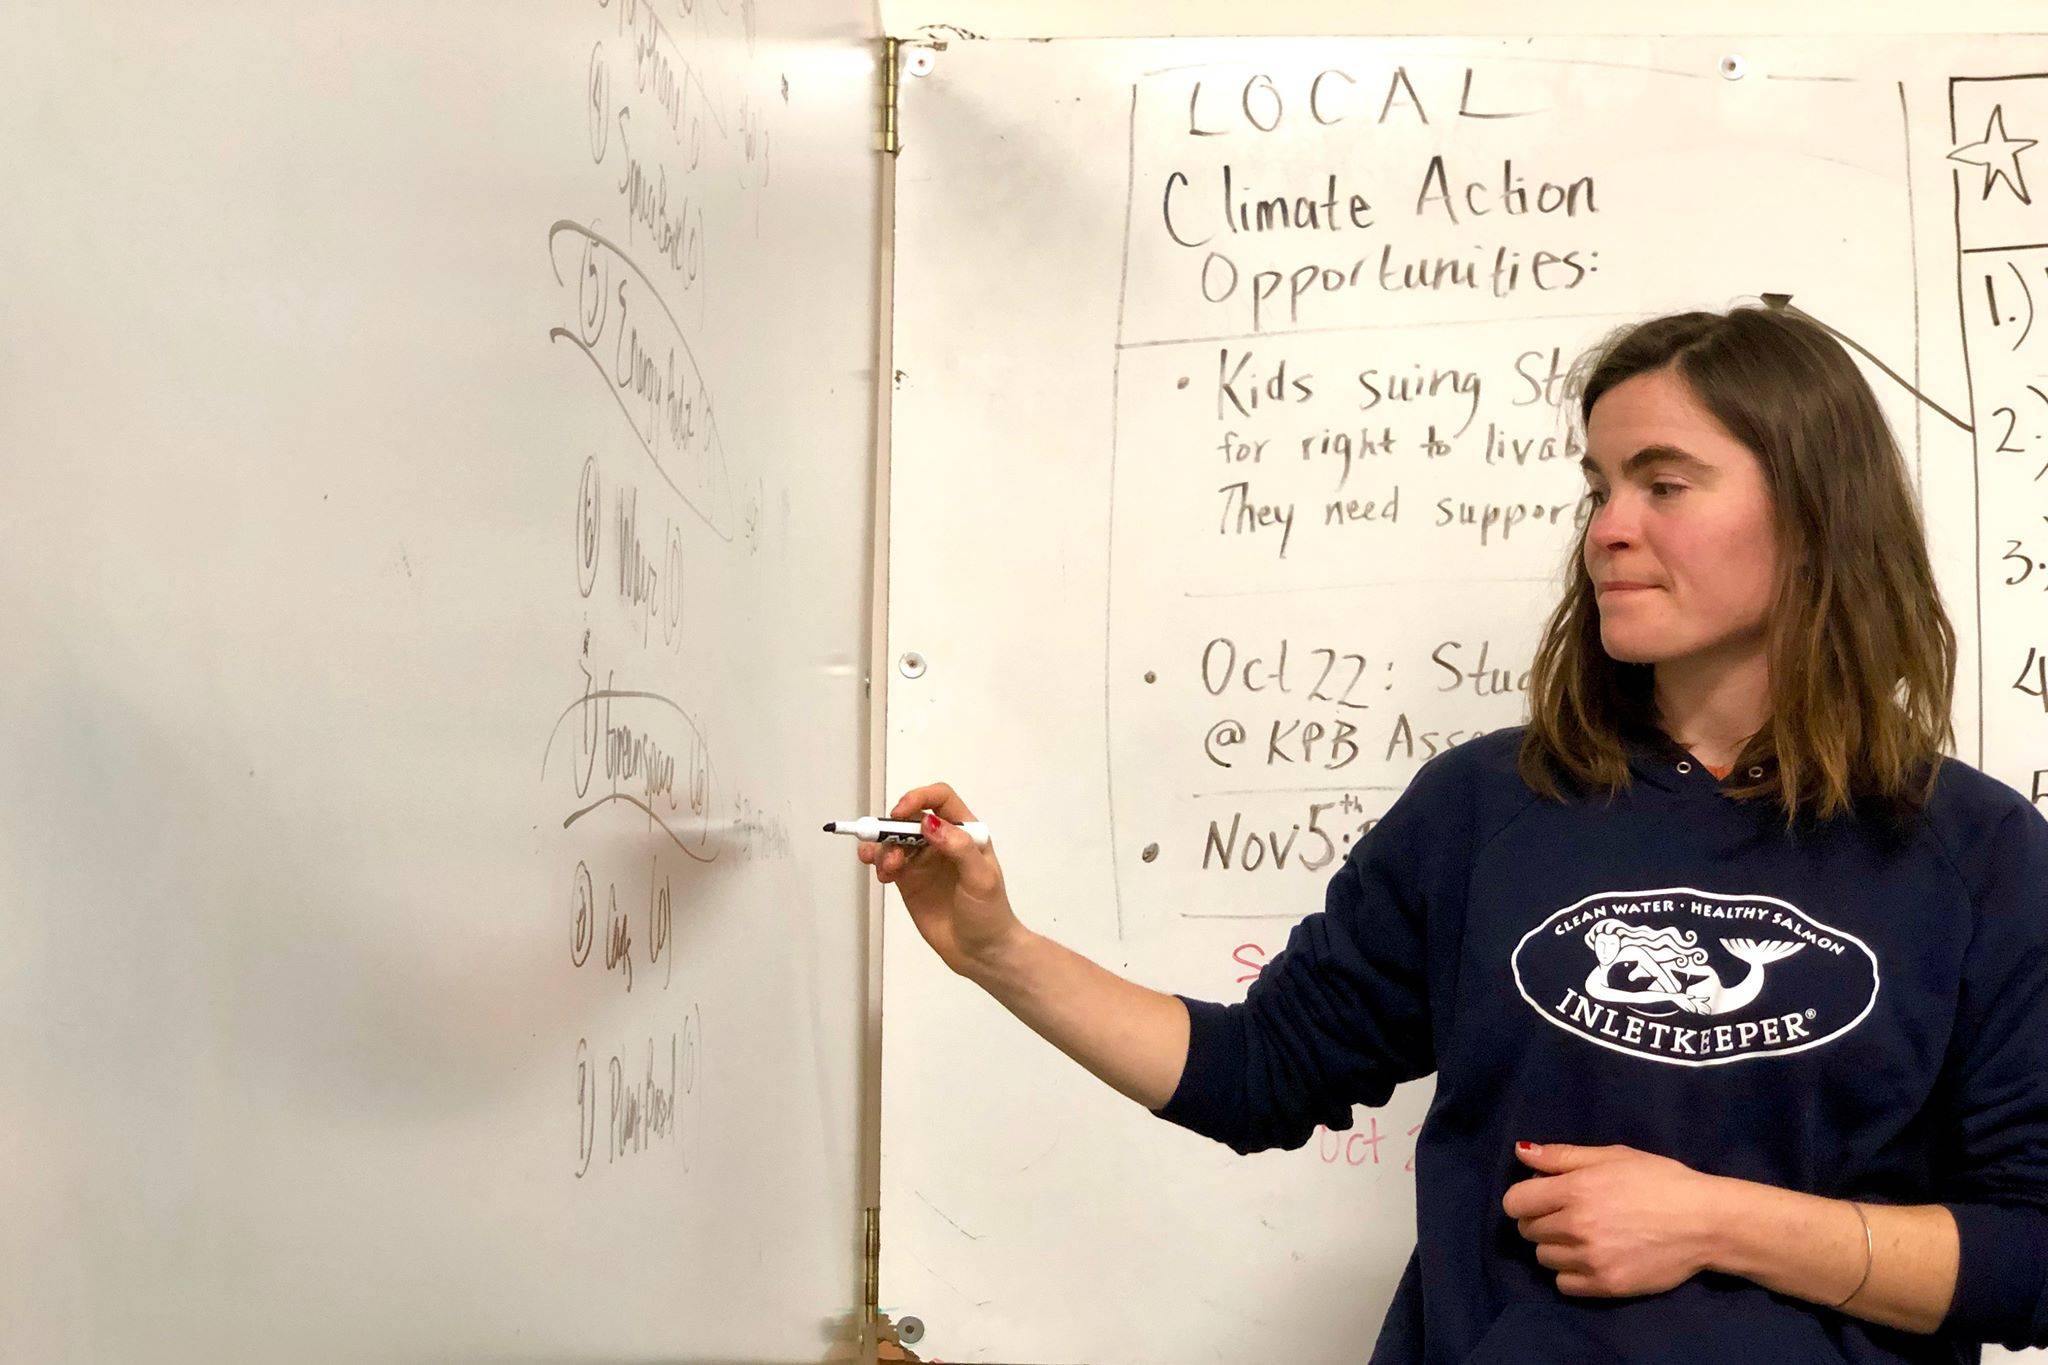 Kaitlin Vadla, Kenai regional director of Cook Inletkeeper, keeps track of community members votes at the final community Drawdown: Climate Series event, Tuesday, Oct. 15, 2019, near Soldotna, Alaska. (Photo by Victoria Petersen/Peninsula Clarion)